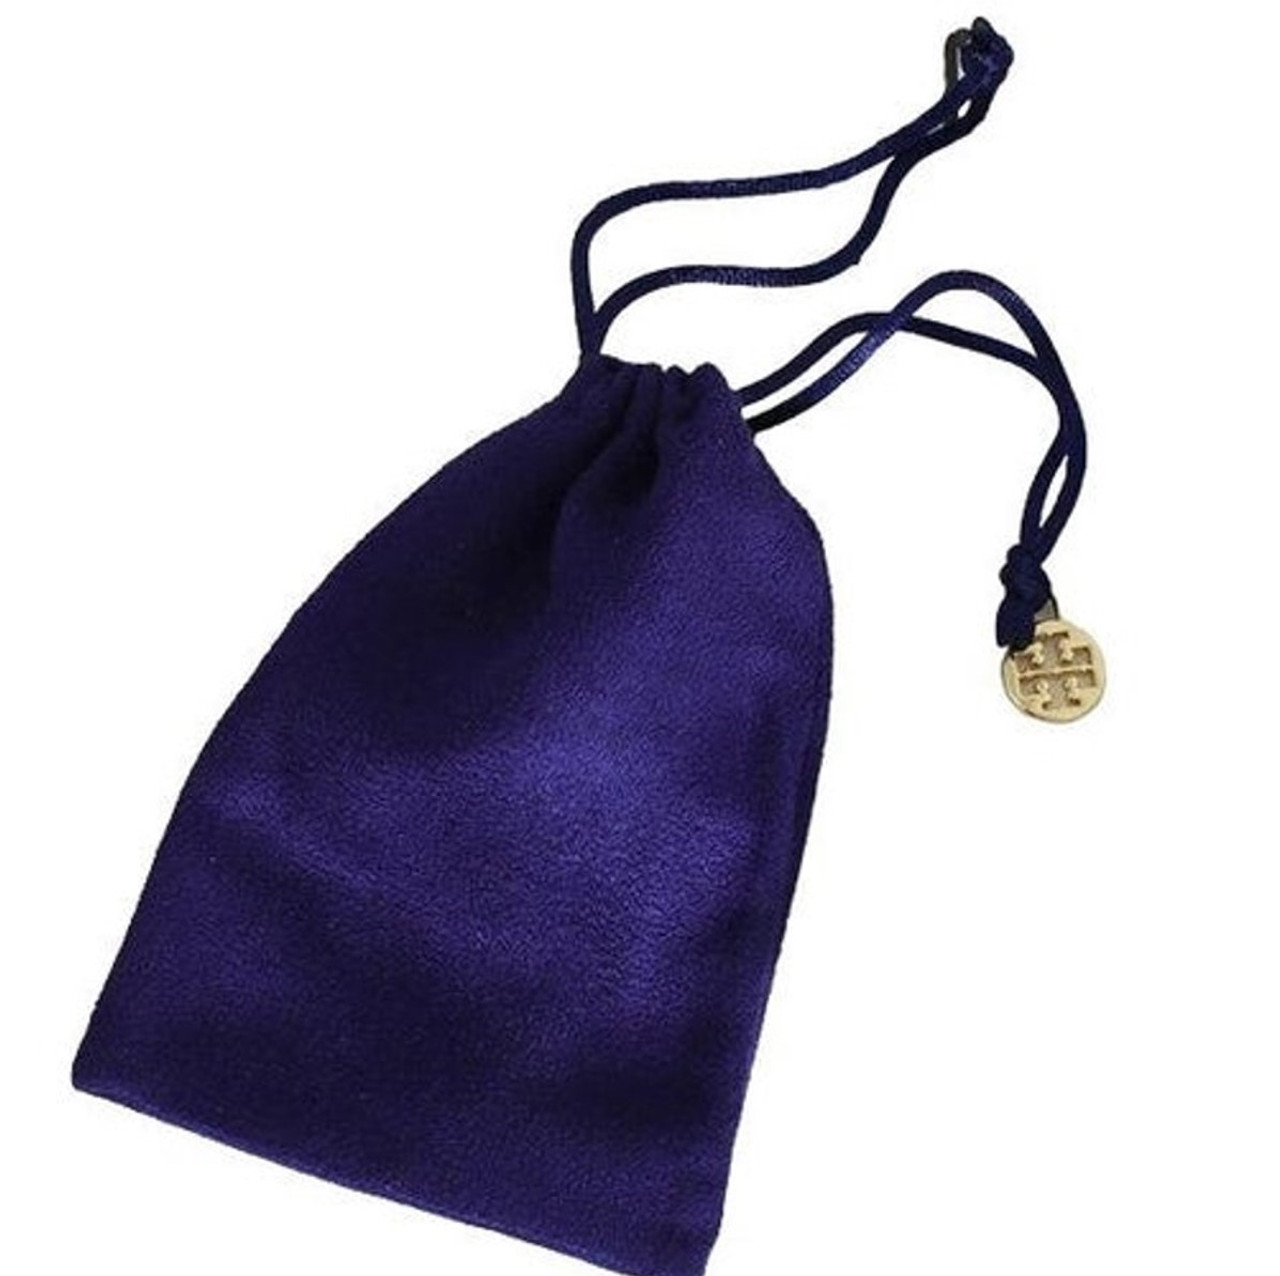 Tory Burch Dust Bag - Luxe Time